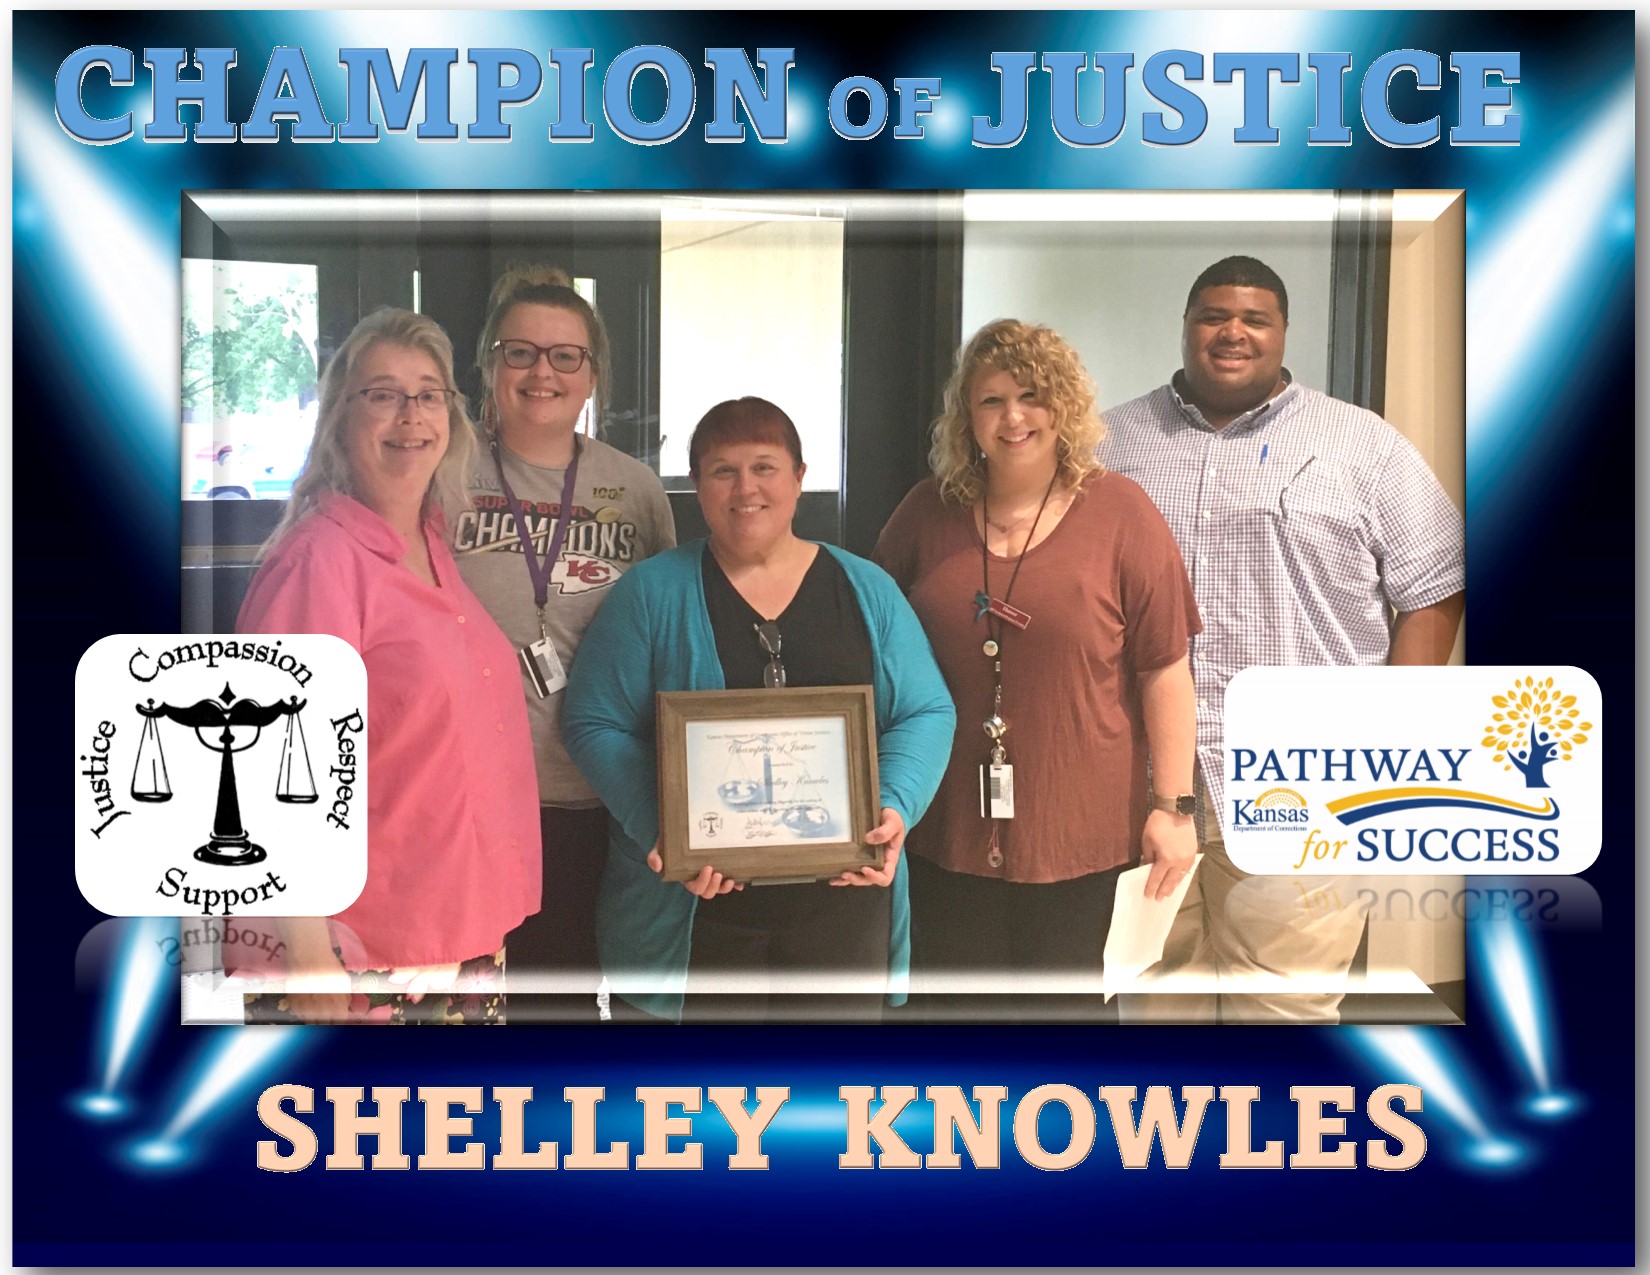 Shelley Knowles, 2022 Champion of Justice Award Winner